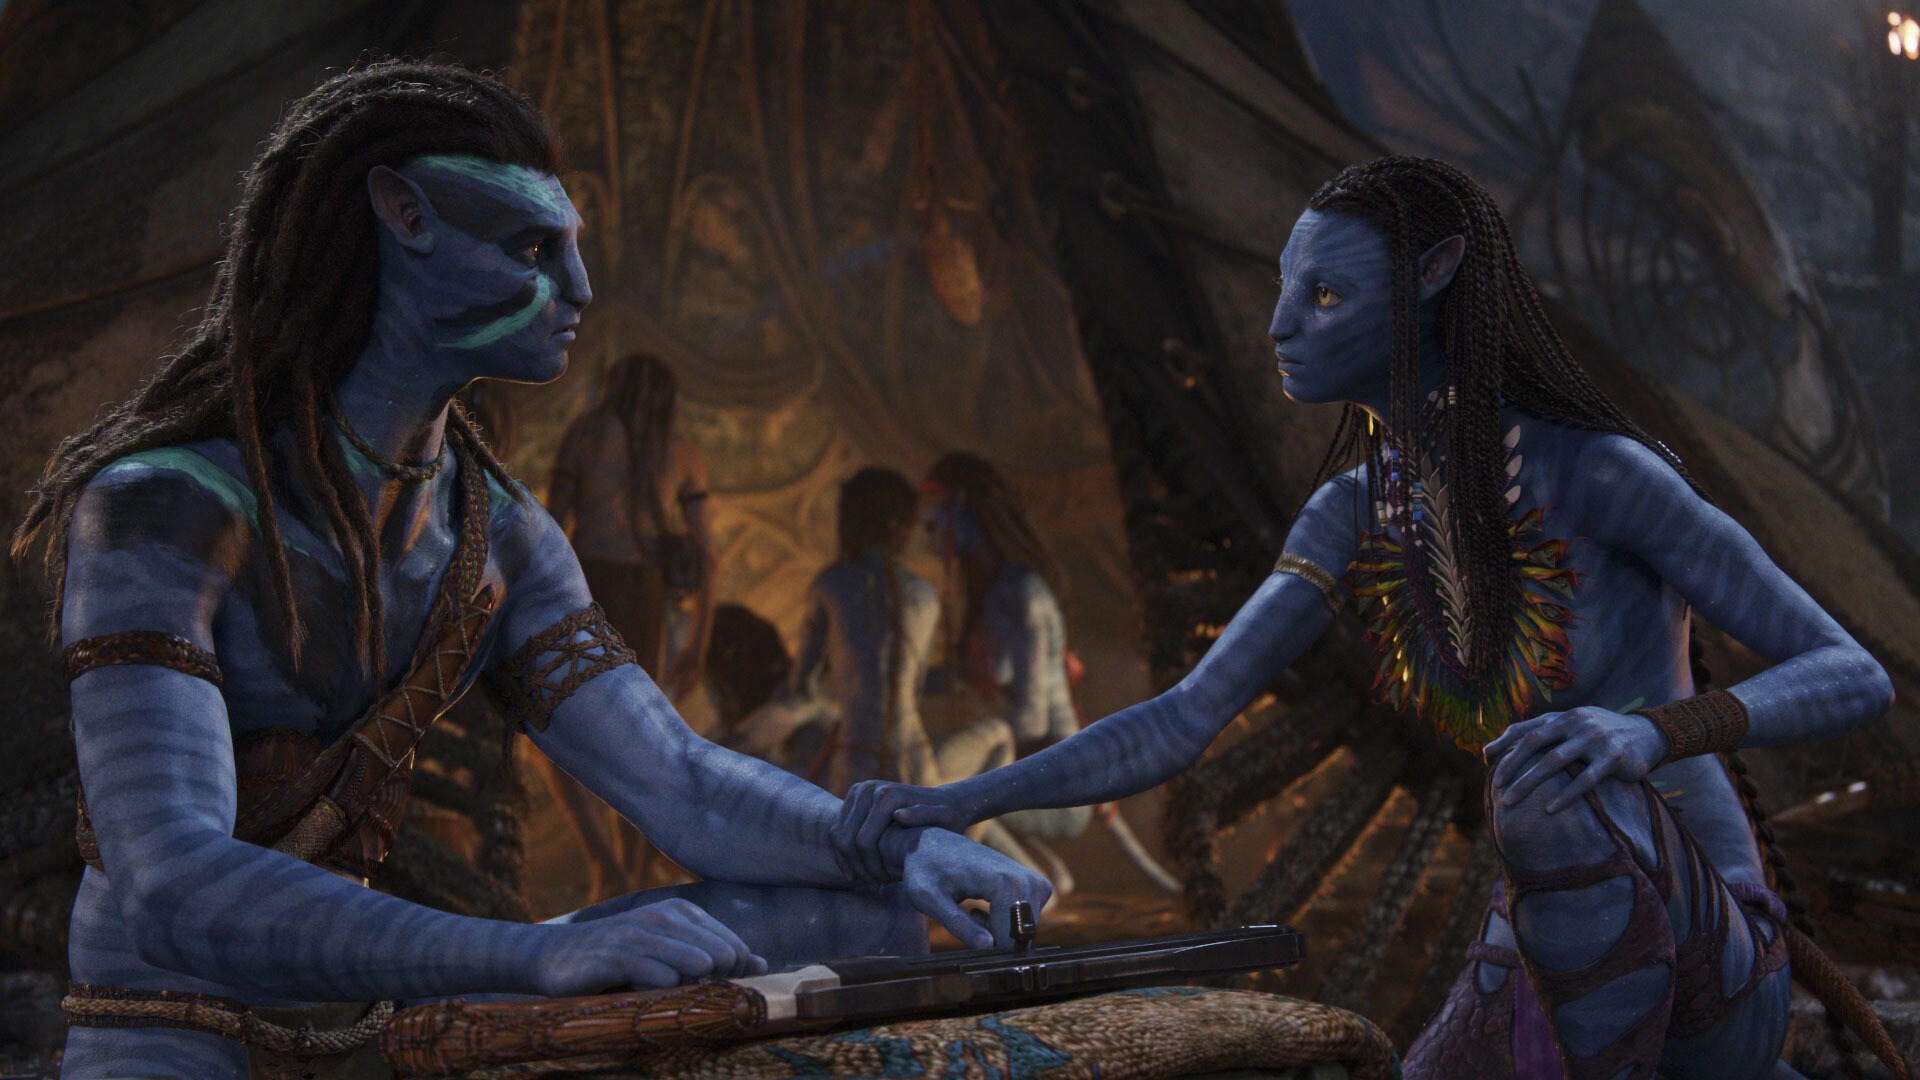 Image of characters from the 20th Century Studios movie Avatar: The Way of Water.